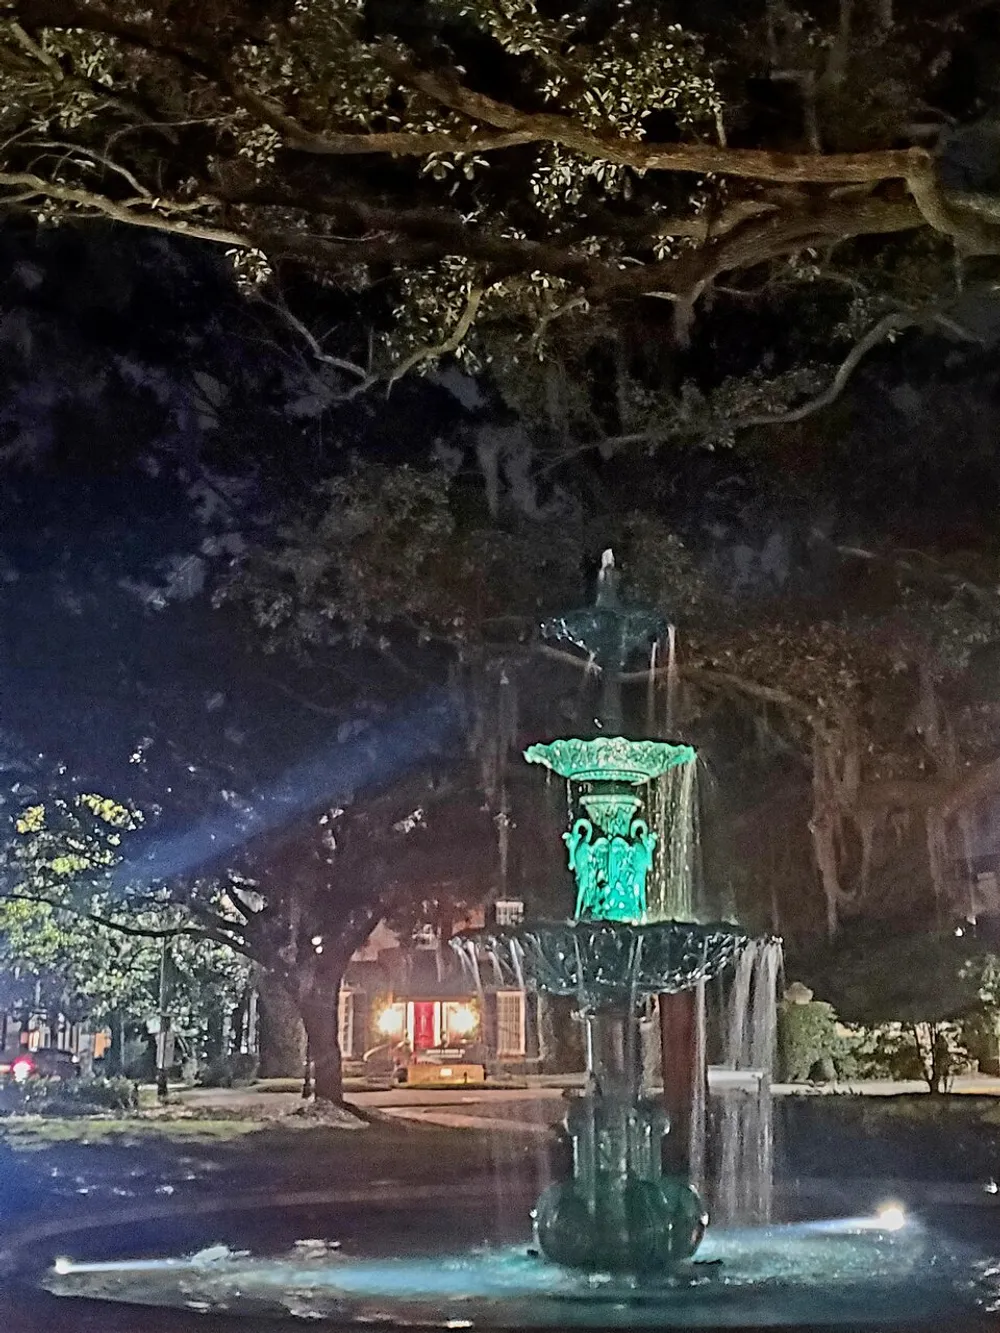 An illuminated fountain stands at night under the sprawling branches of a tree with a residential house visible in the background